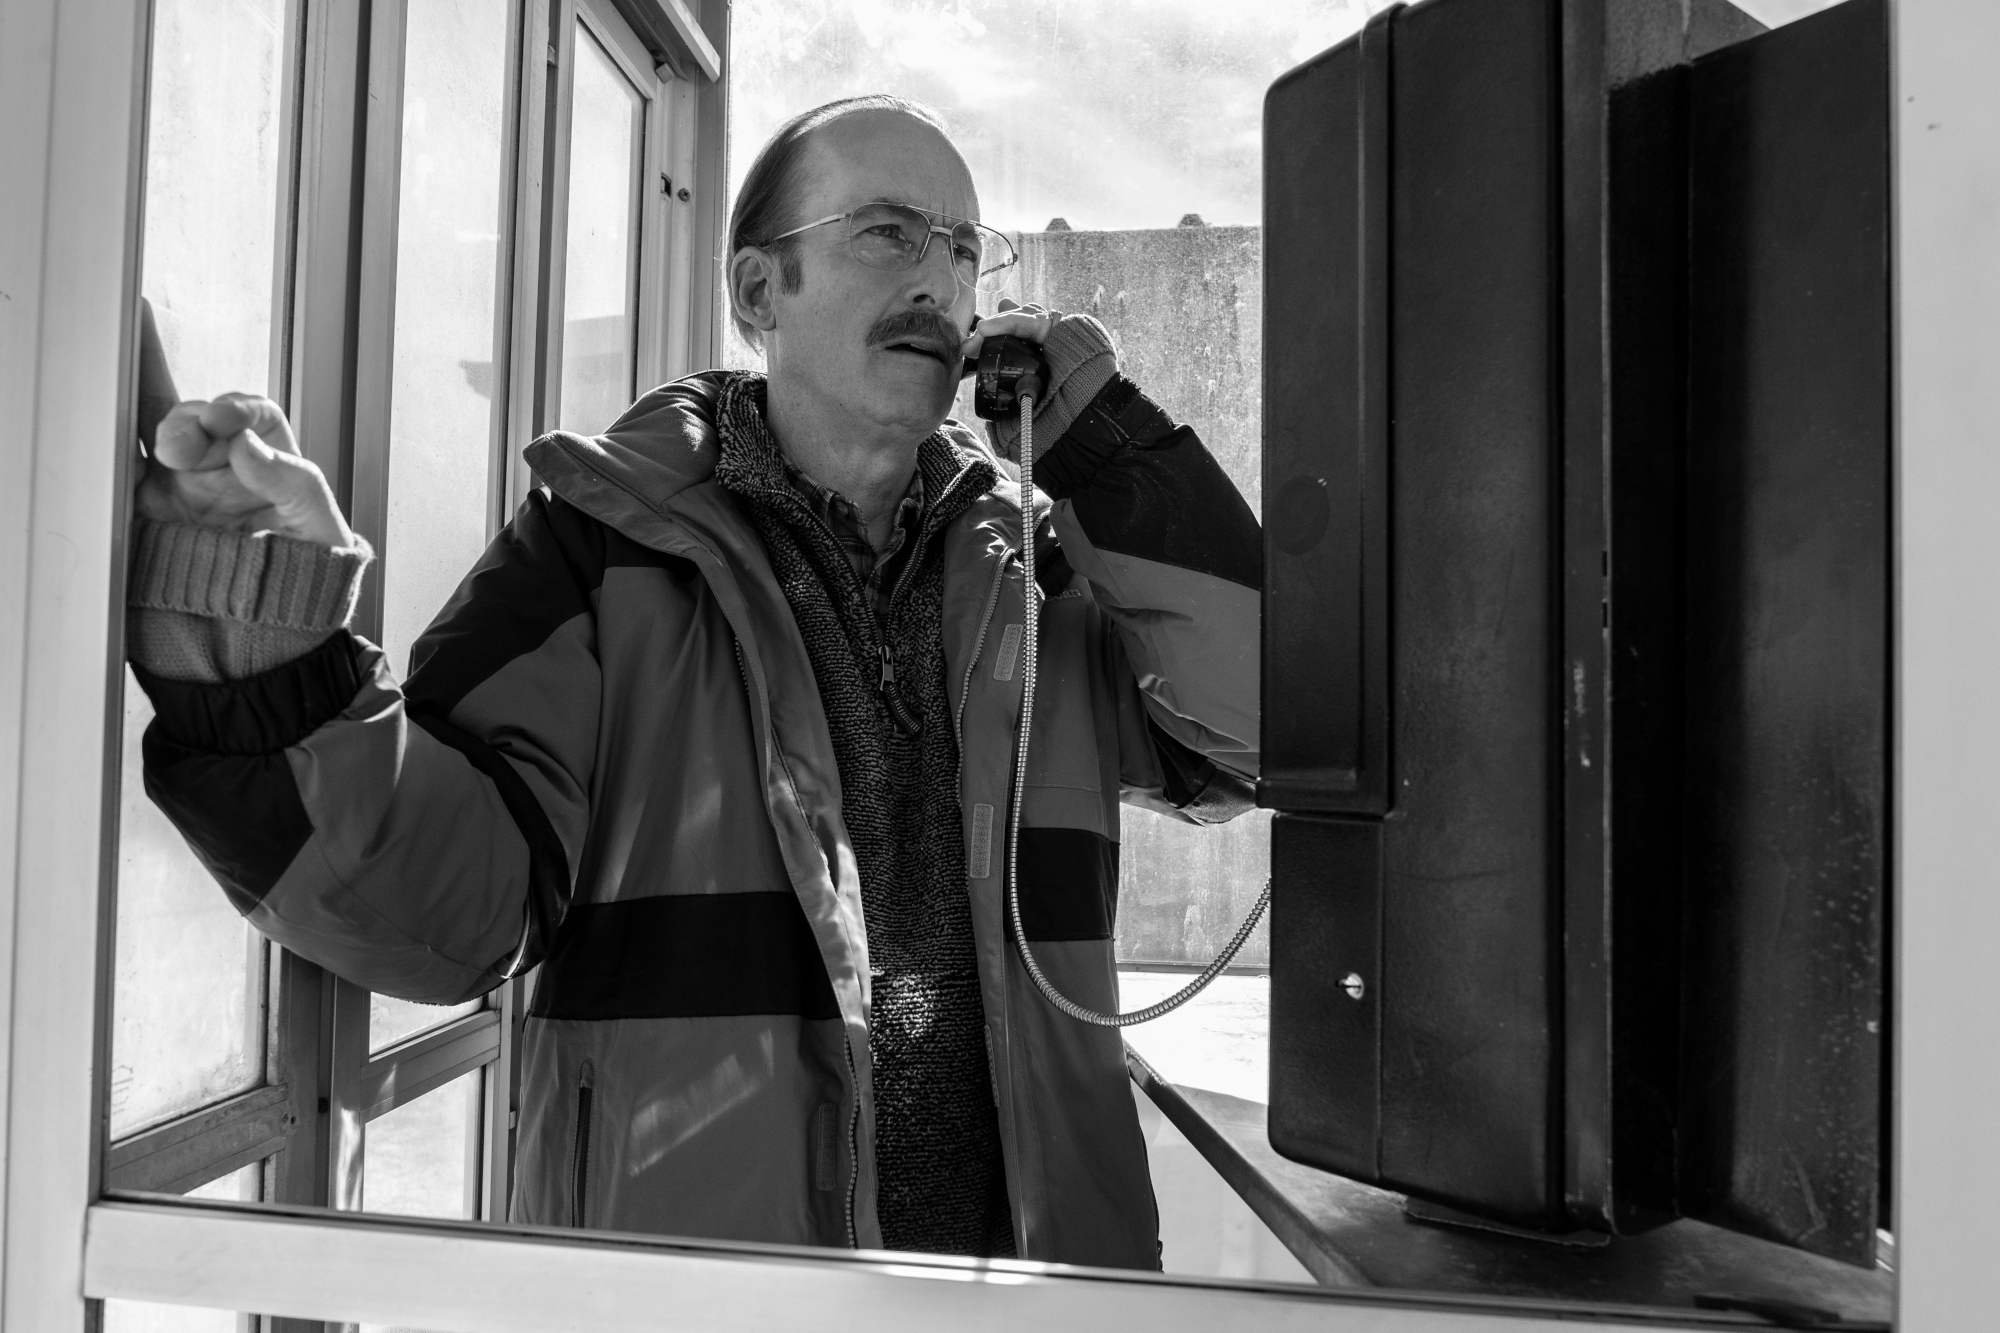 Bob Odenkirk as Gene Takovic in 'Better Call Saul' Season 6 Episode 11, "Breaking Bad," He's standing in a phone booth and talking into a payphone.